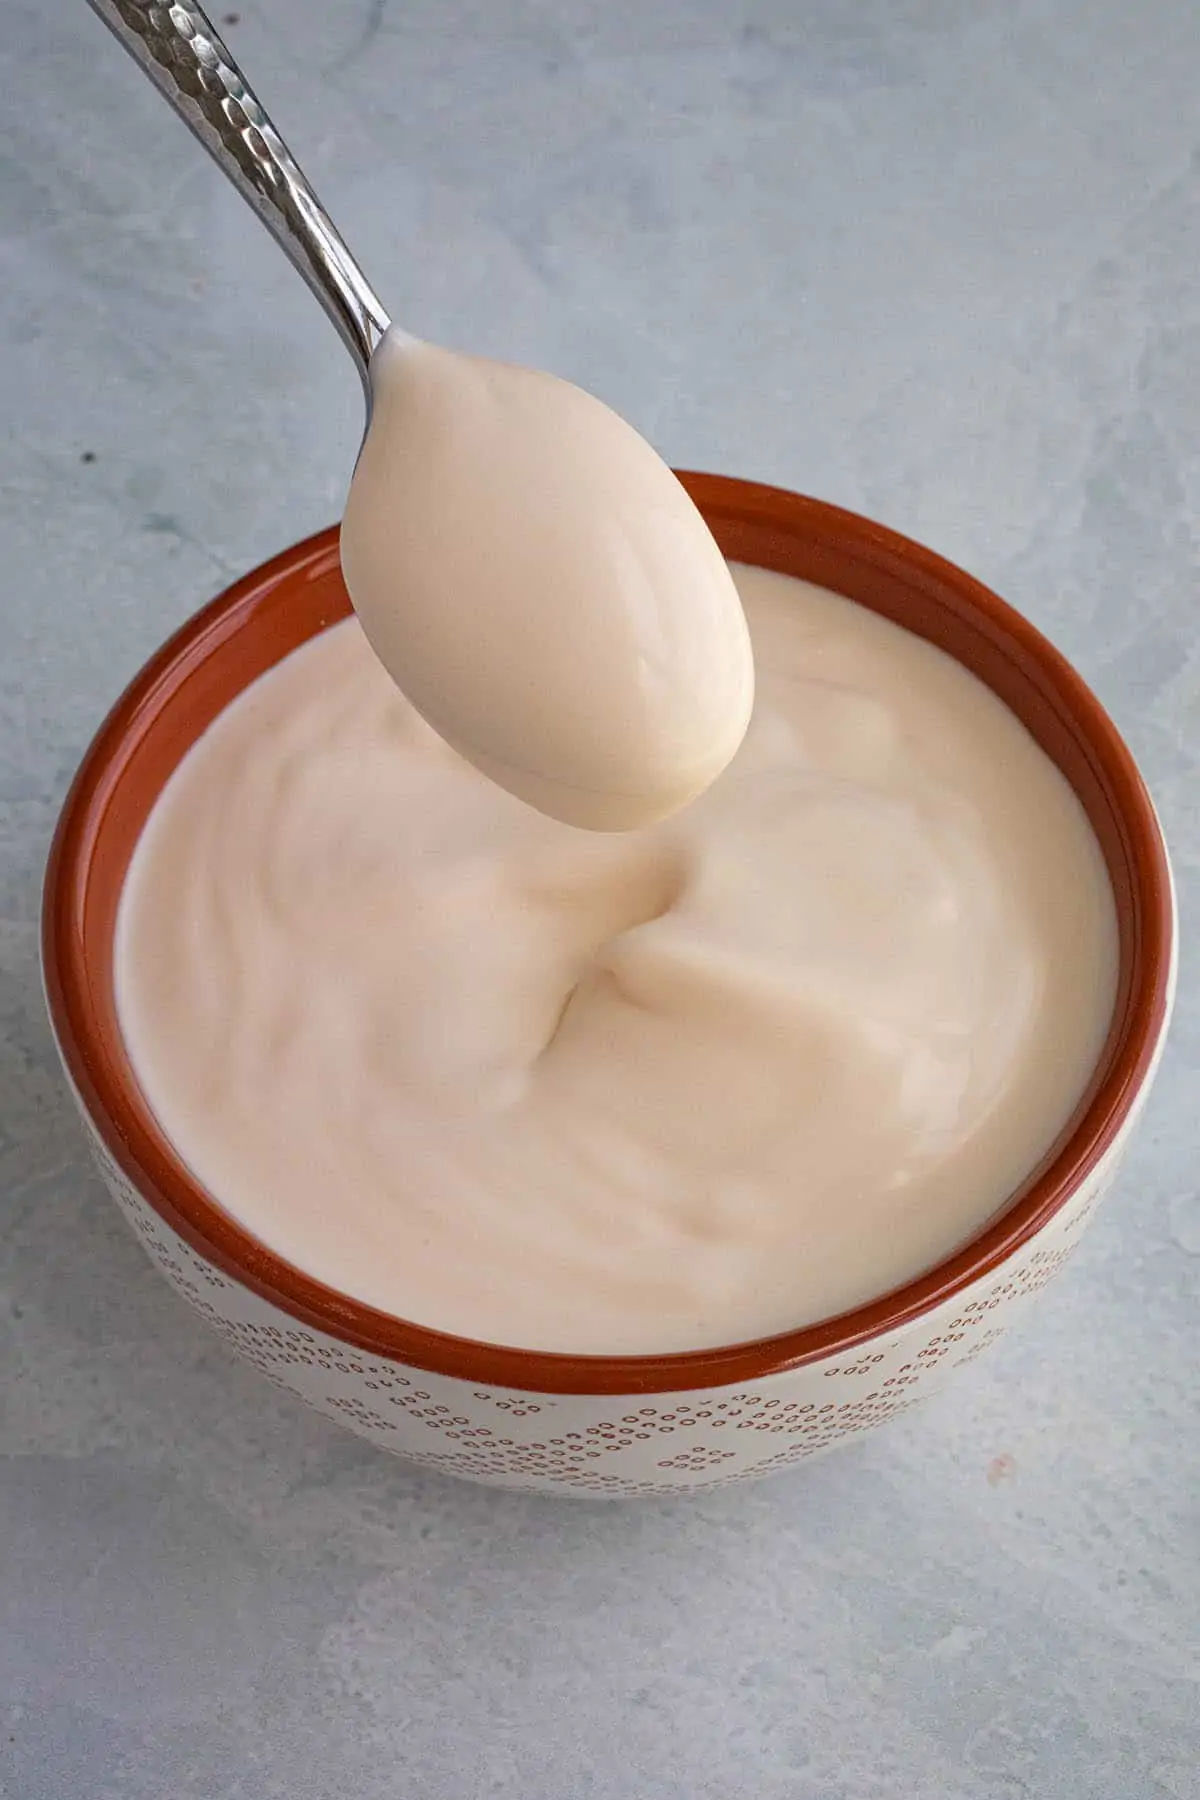 Mexican Crema on a spoon